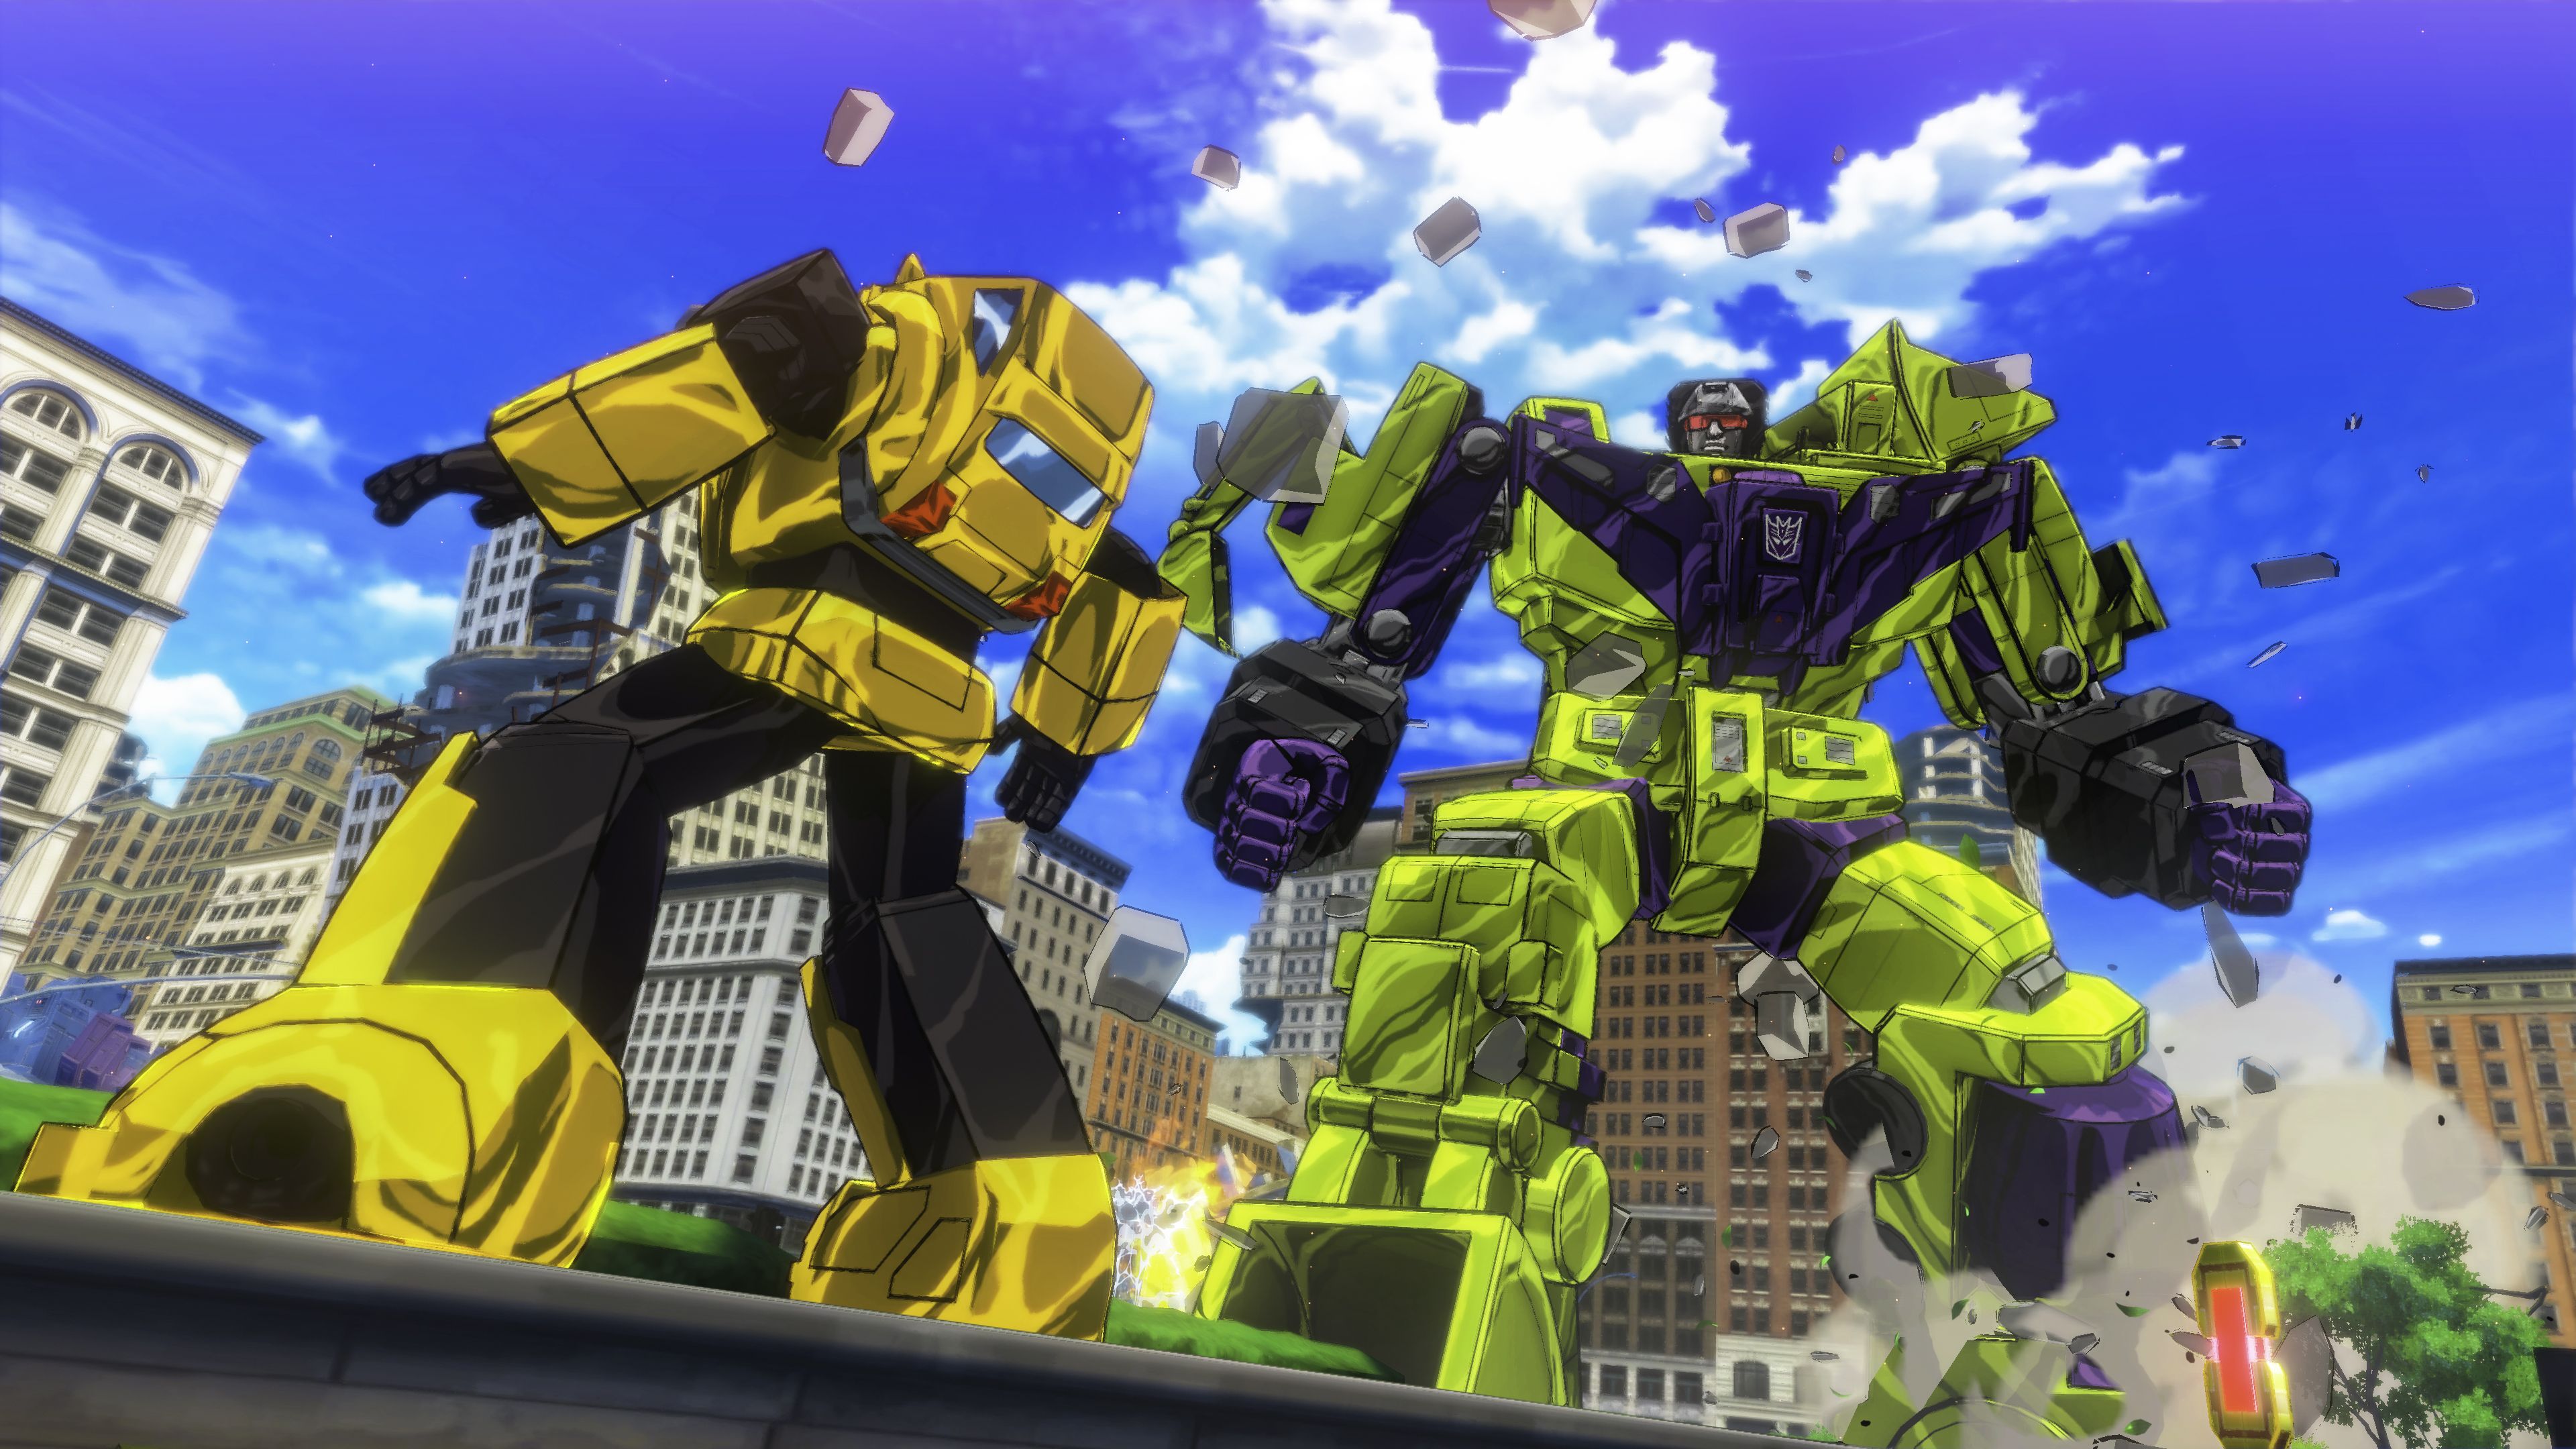 Who Is Devastator and the Constructicons in Transformers? - IMDb